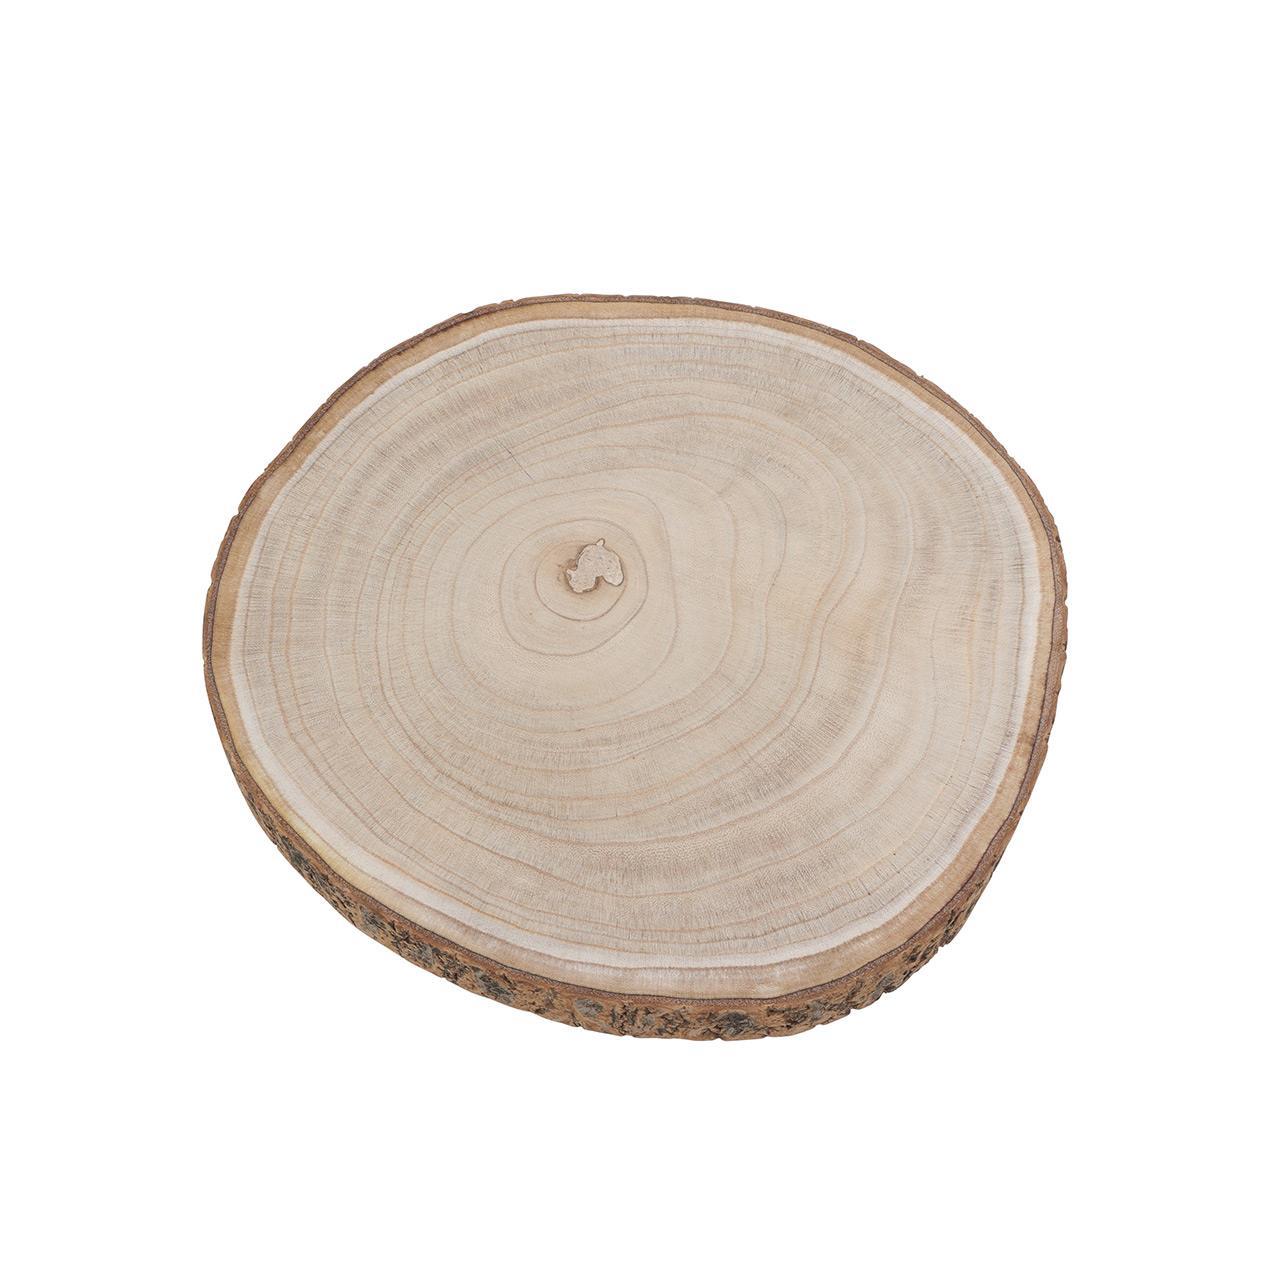 Wooden Tree Trunk Rustic Cake Stand | M&W